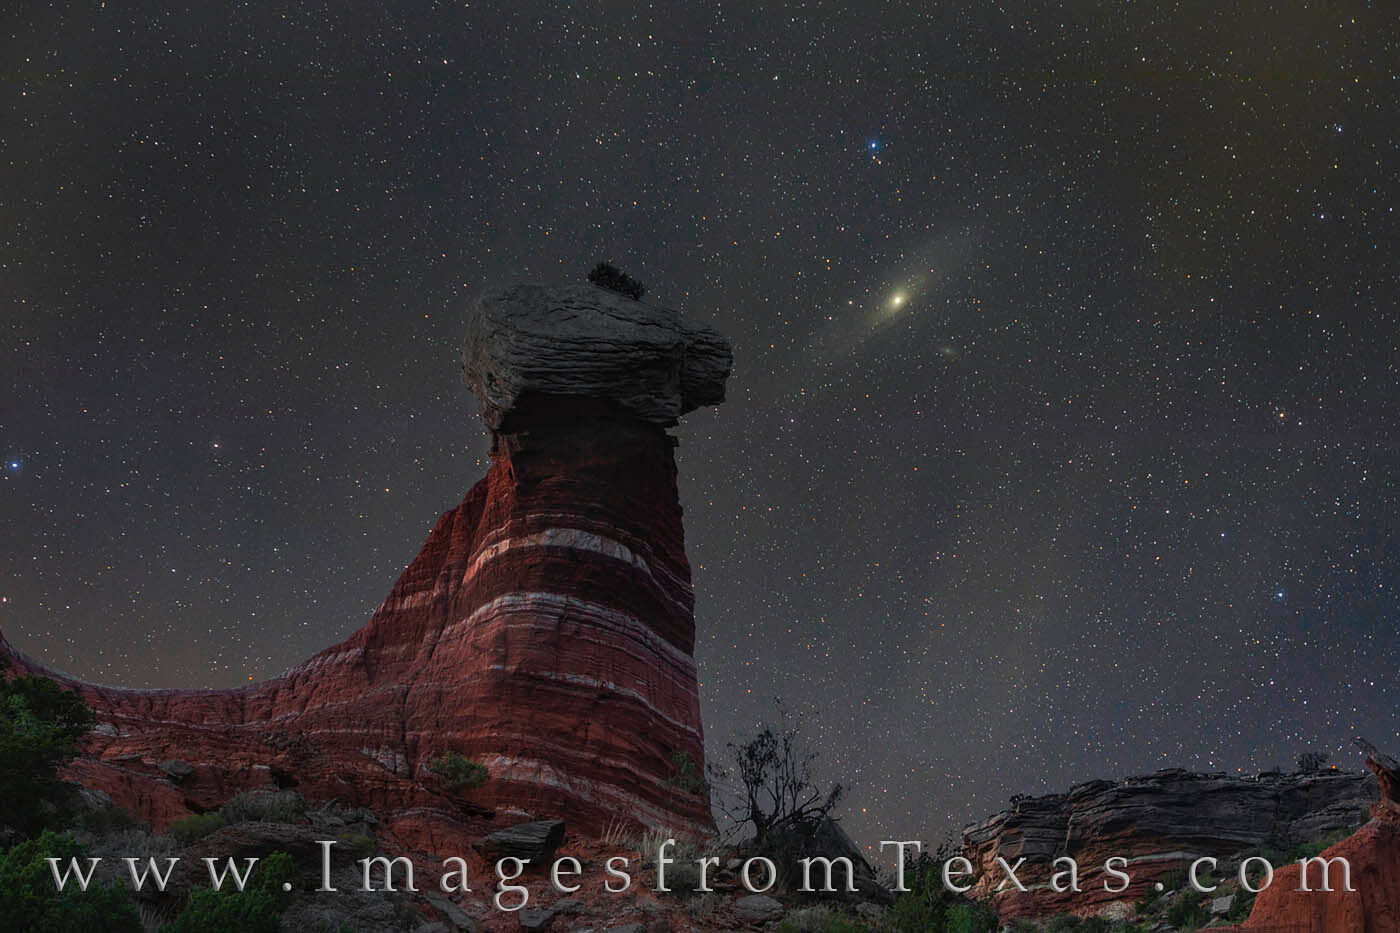 The Andromeda Galaxy, also known as Messier 31 (M31) rests in the night sky over Red Star Hoodoo in Palo Duro Canyon. This image...